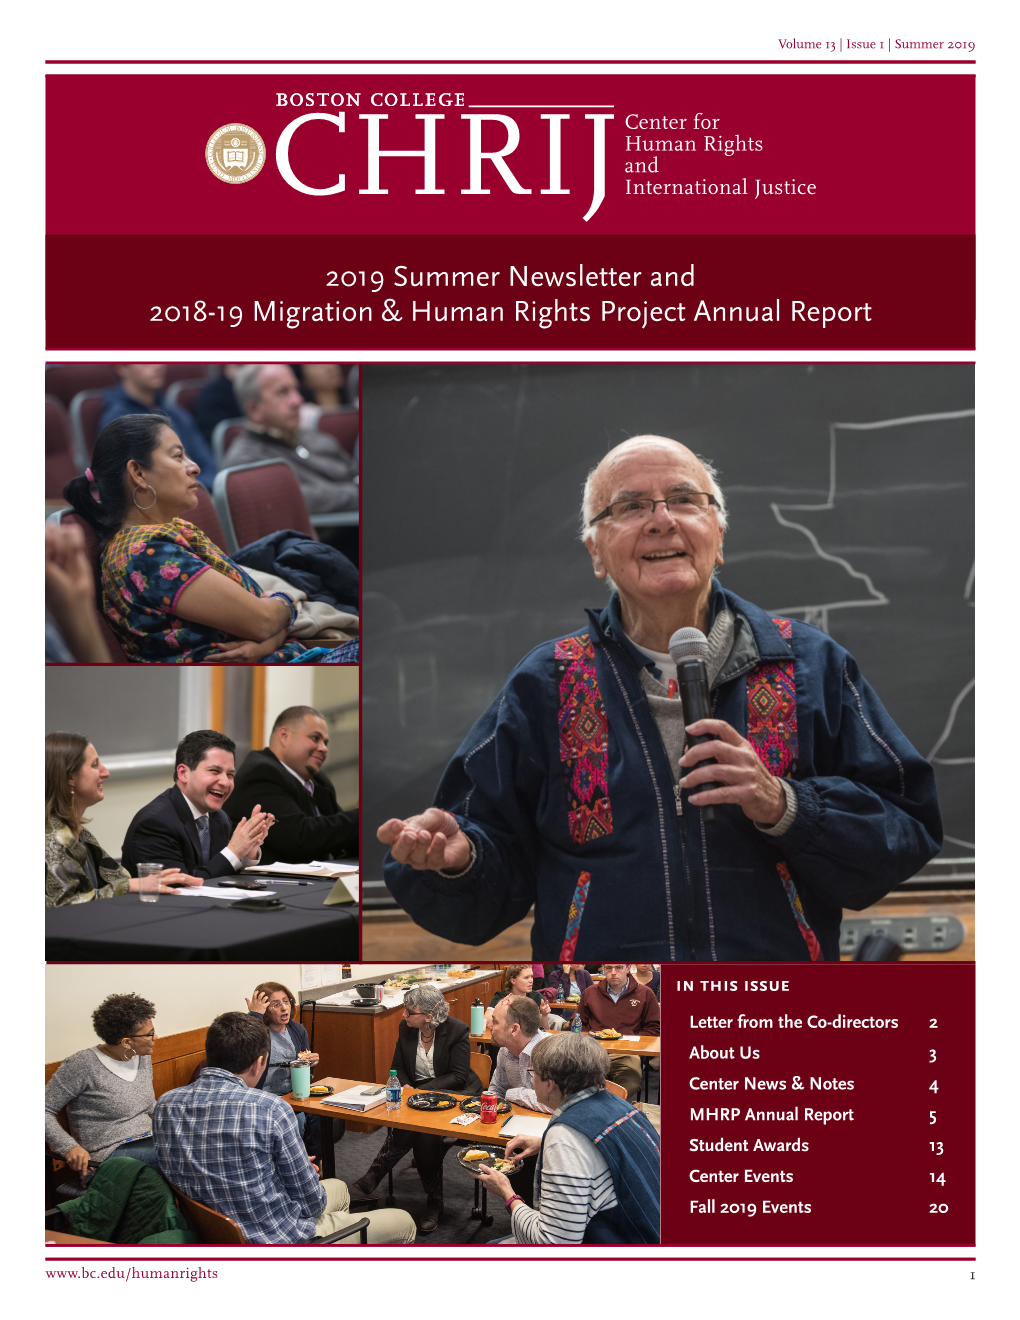 Summer 2019 Newsletter and MHRP Annual Report